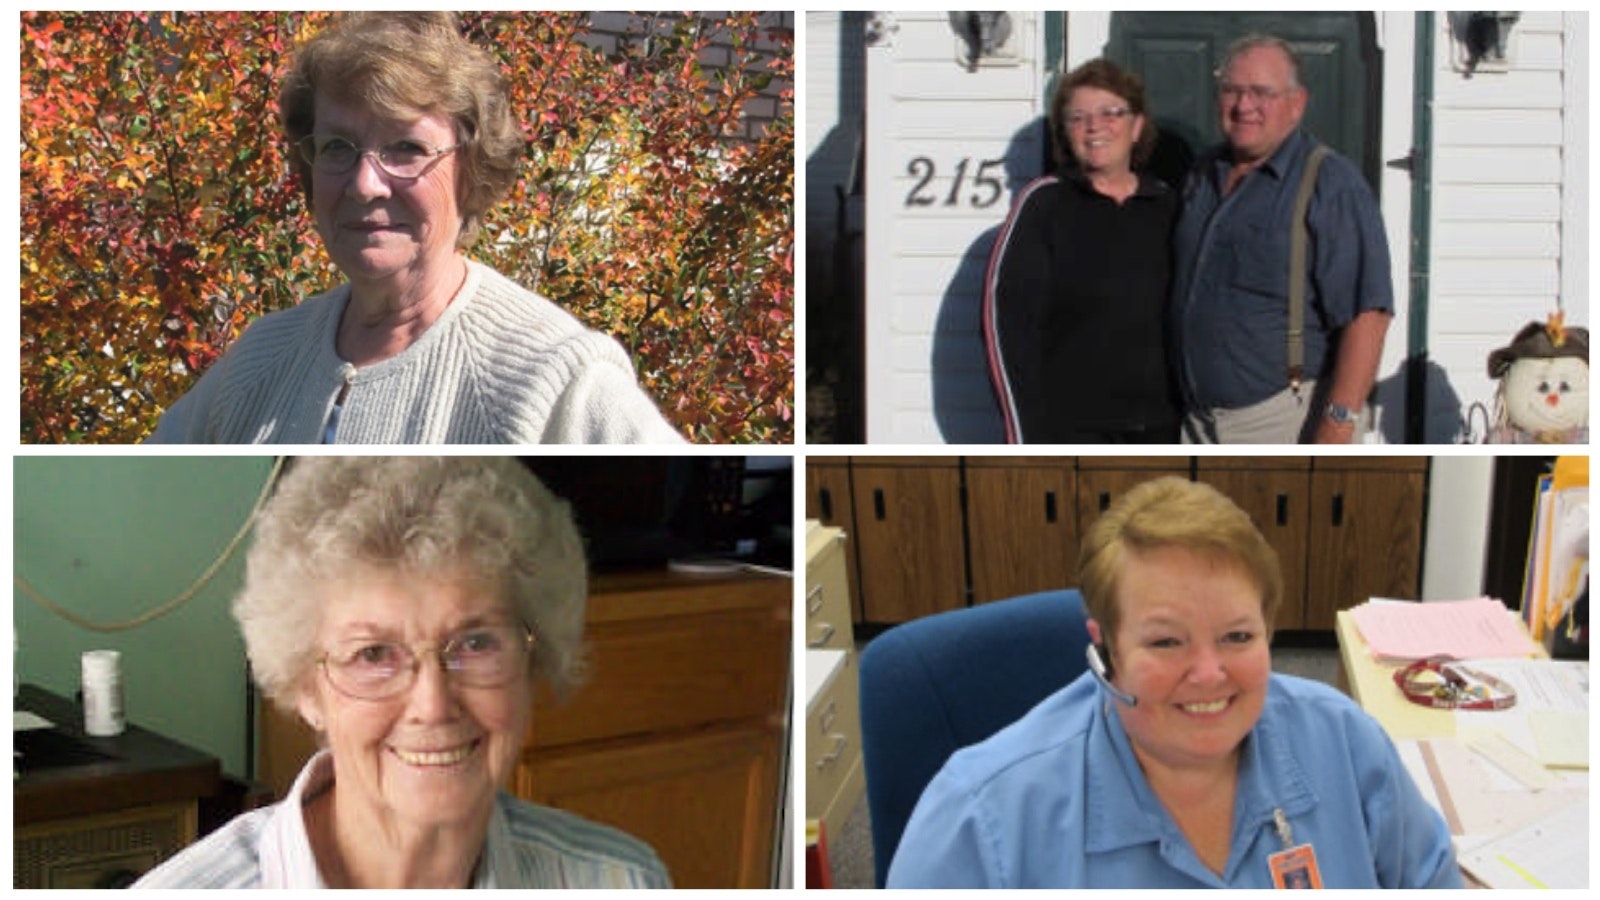 In a 2010 interview from the archives of the Wyoming Department of State Parks and Cultural Resources, responders to and survivors of the 1986 Cokeville Elementary School bombing told their stories, including, clockwise from top left, Janelle Dayton, who was a first grade teacher at the school; firefighter Kevin Walker and wife Glenna, an EMT; Kliss Sparks, also a fourth grade teacher at the time; and Tina Cook, who was a secretary at the school that day. She said she’ll never forget the look in David Young’s eyes that day: “It was like looking into emptiness.”